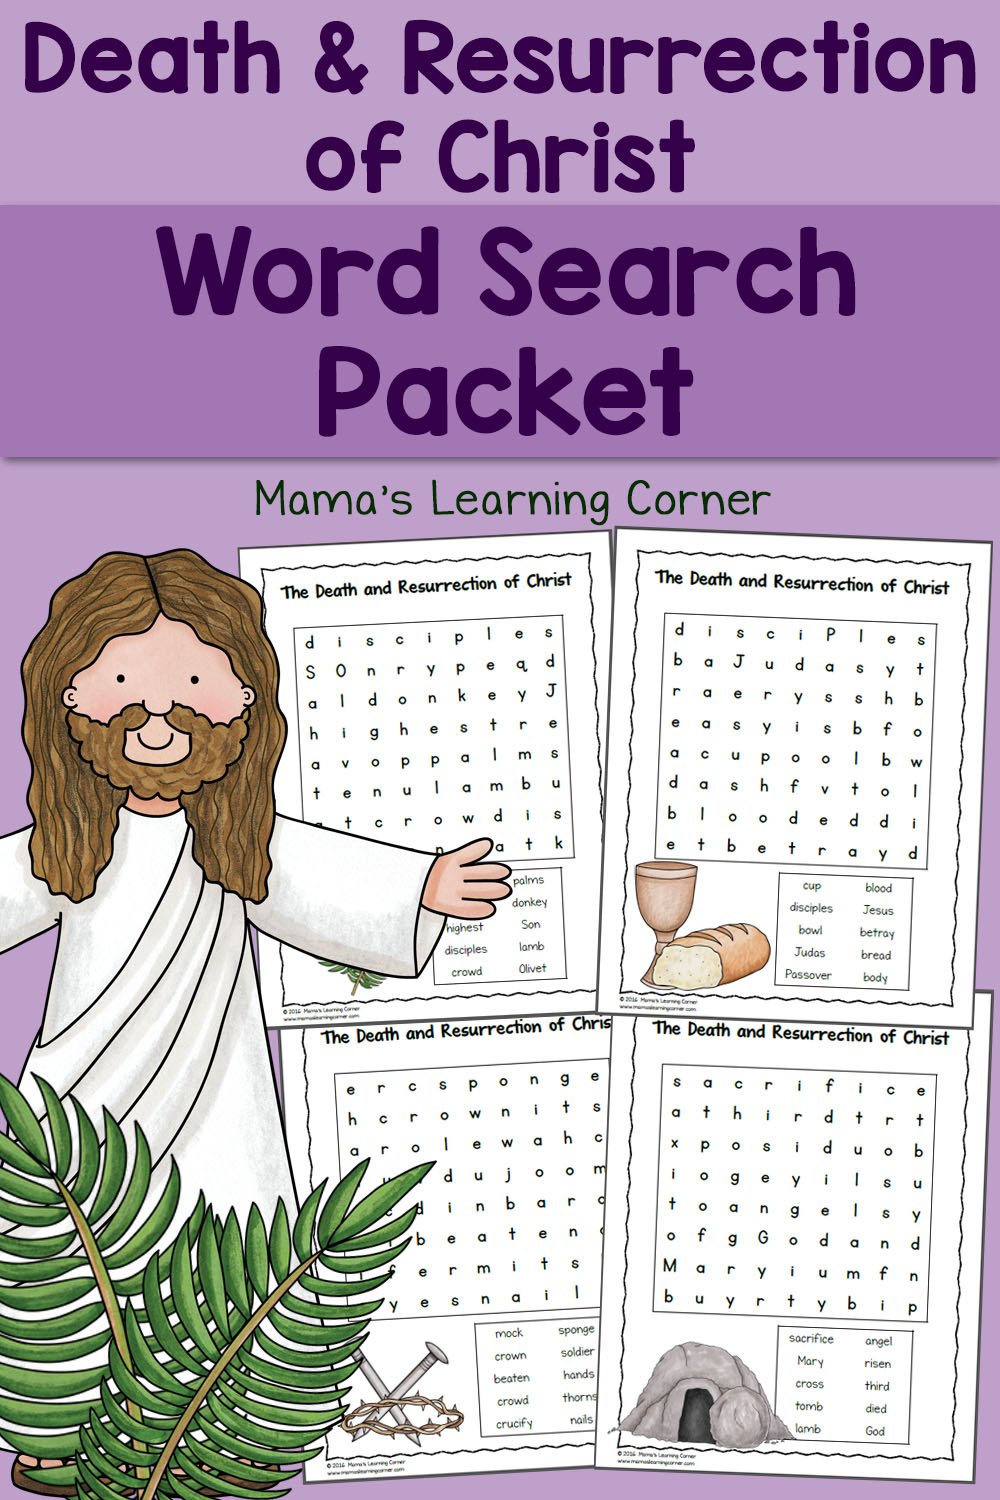 The Death and Resurrection of Christ Word Searches - Mamas Learning Corner